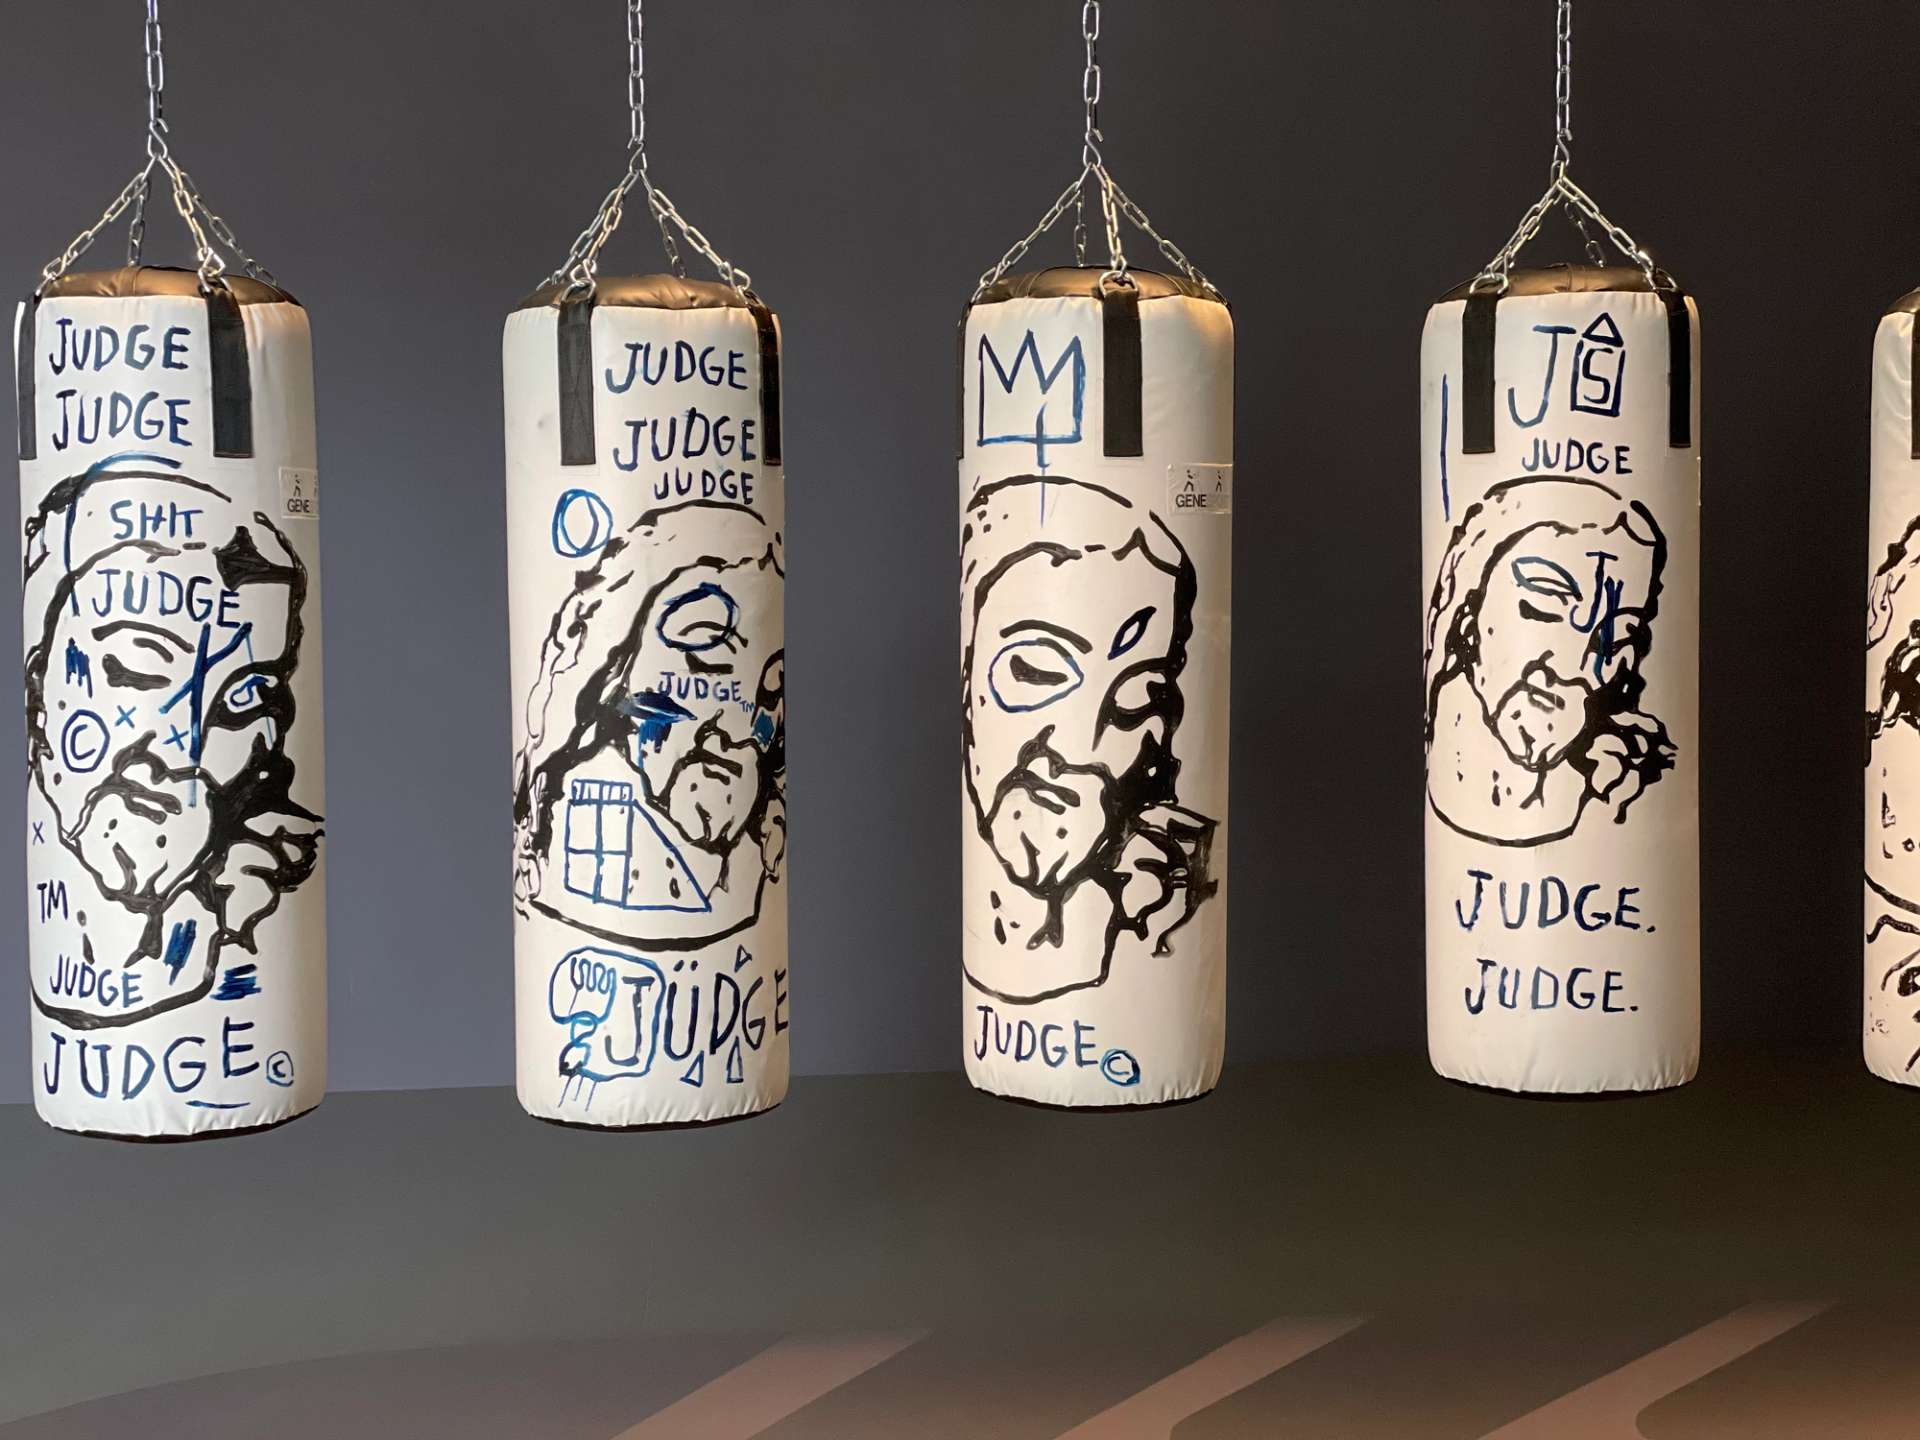 White punching bags with painted images of Christ